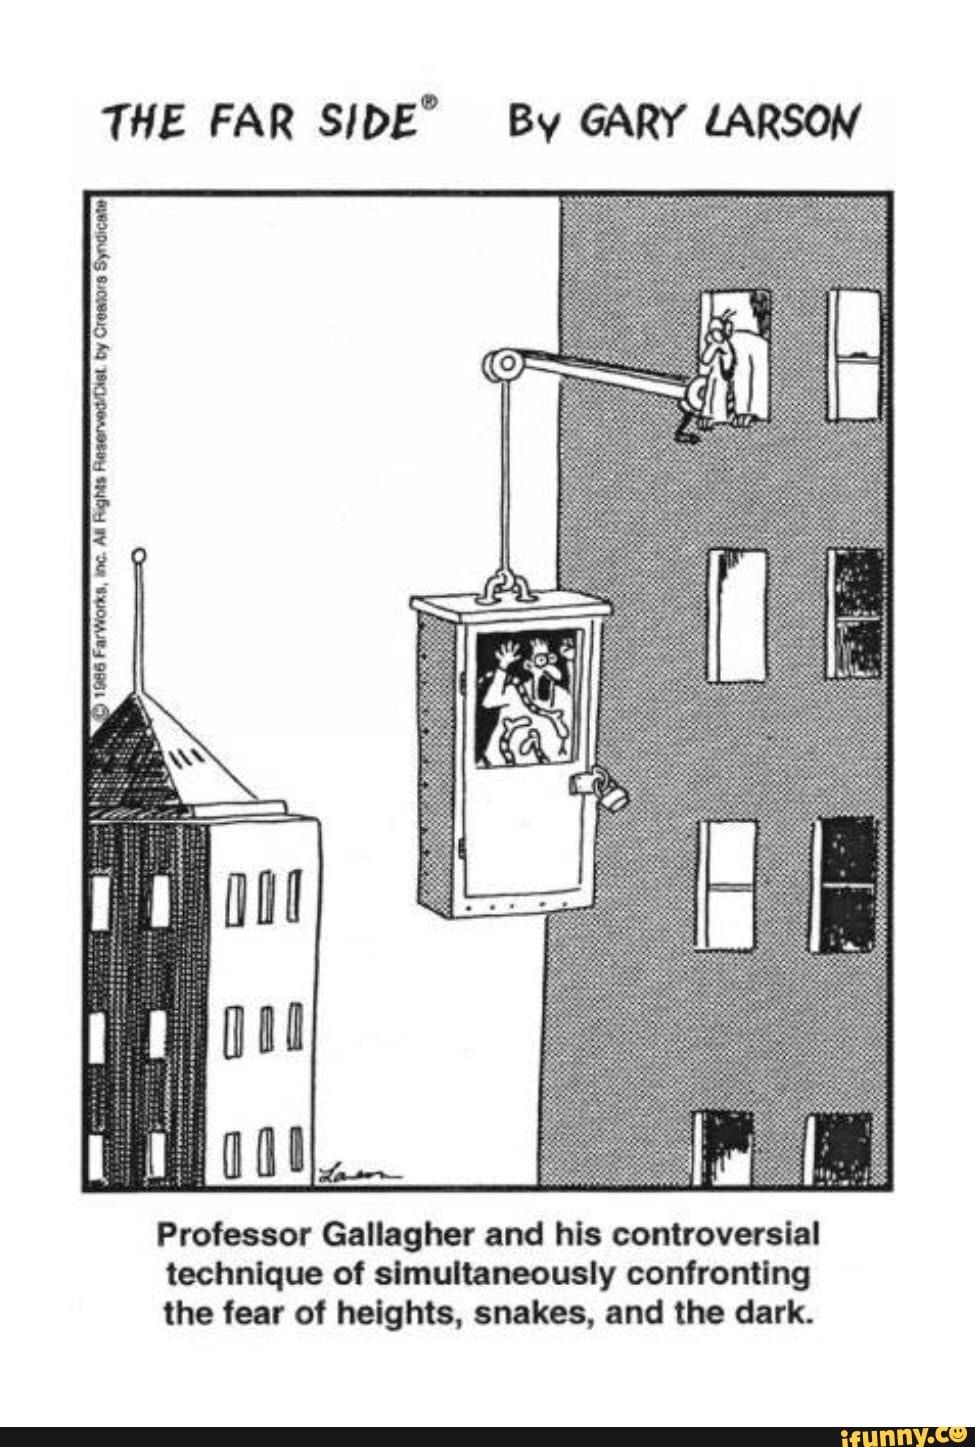 far side comic, a man is suspended off a building in a dark box covered in snakes while a psychologist watches